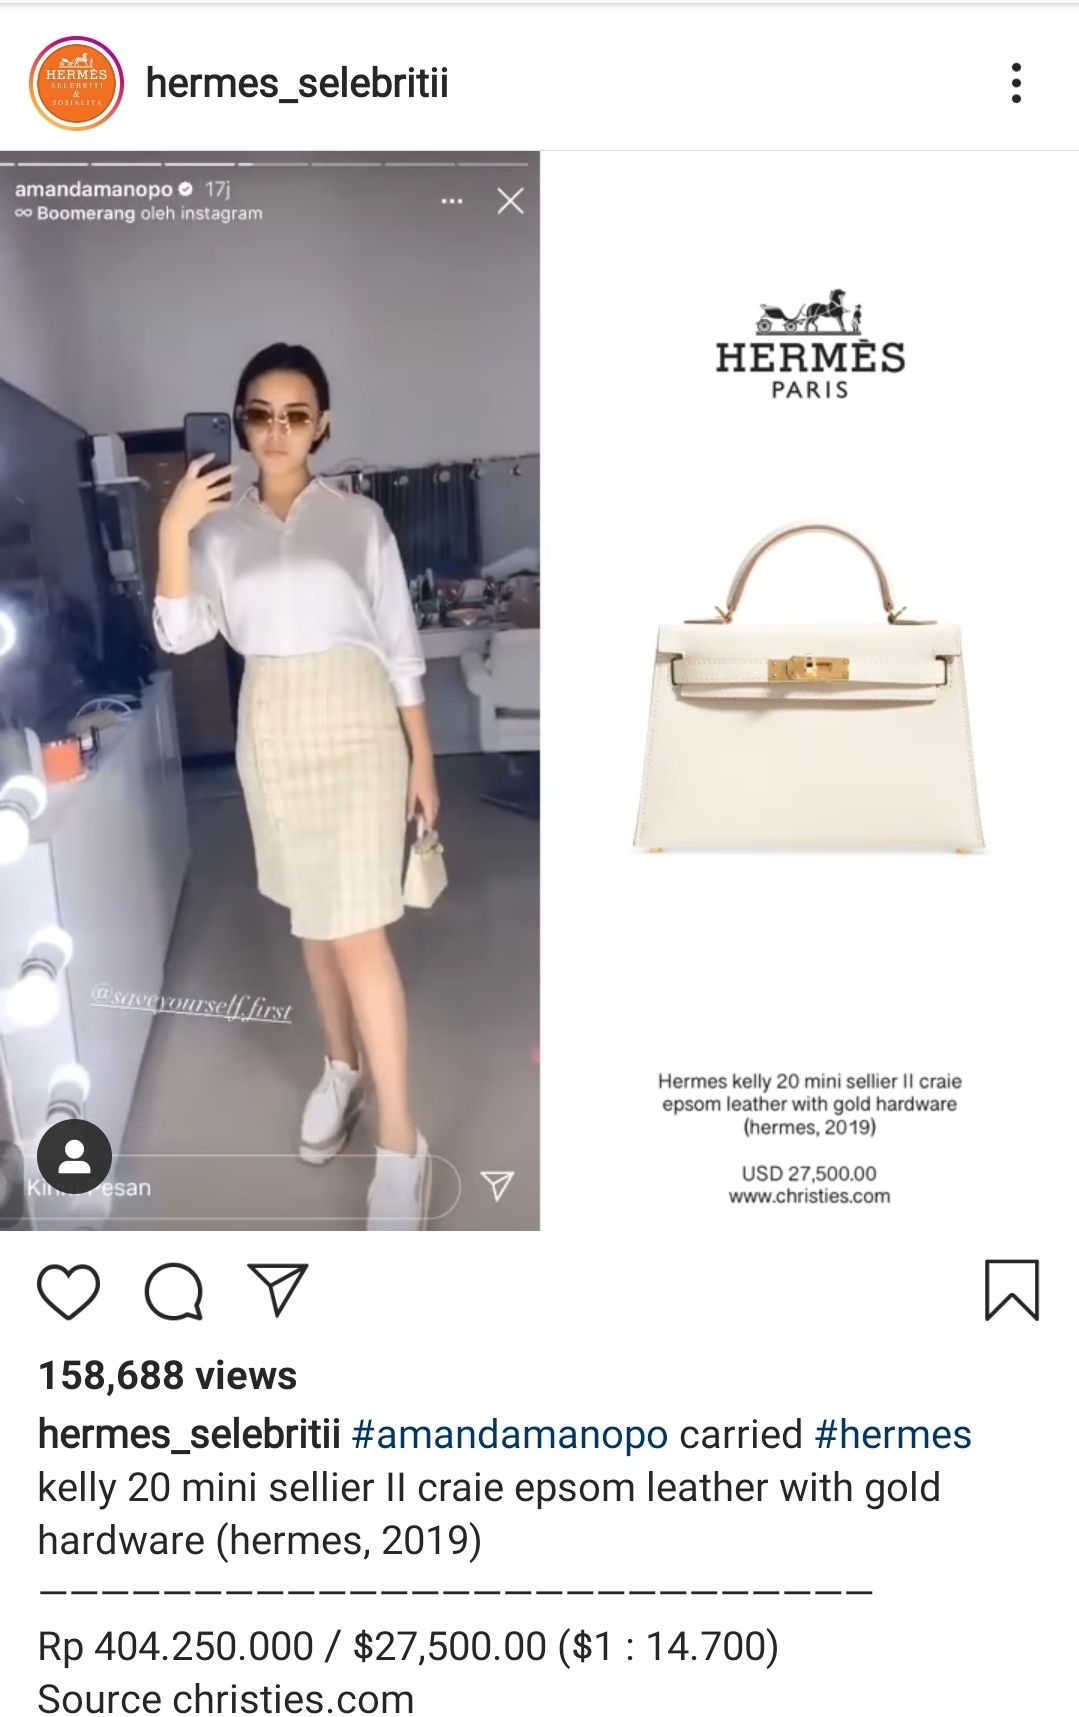 citrakirana carried K32 sellier craie epsom leather with gold